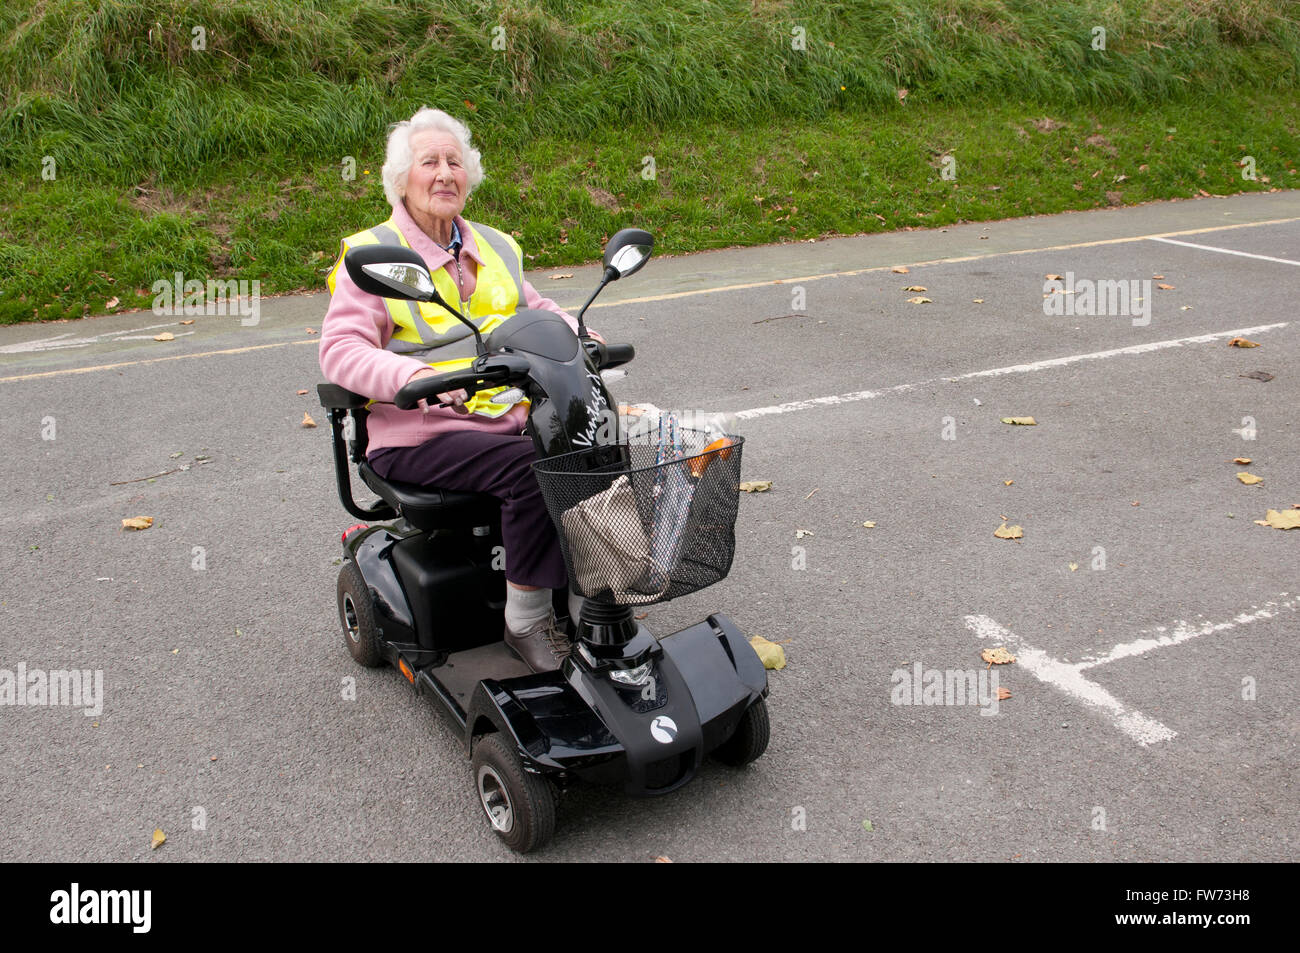 elderly-woman-using-a-mobility-scooter-wearing-a-yellow-hi-vis-safety-FW73H8.jpg